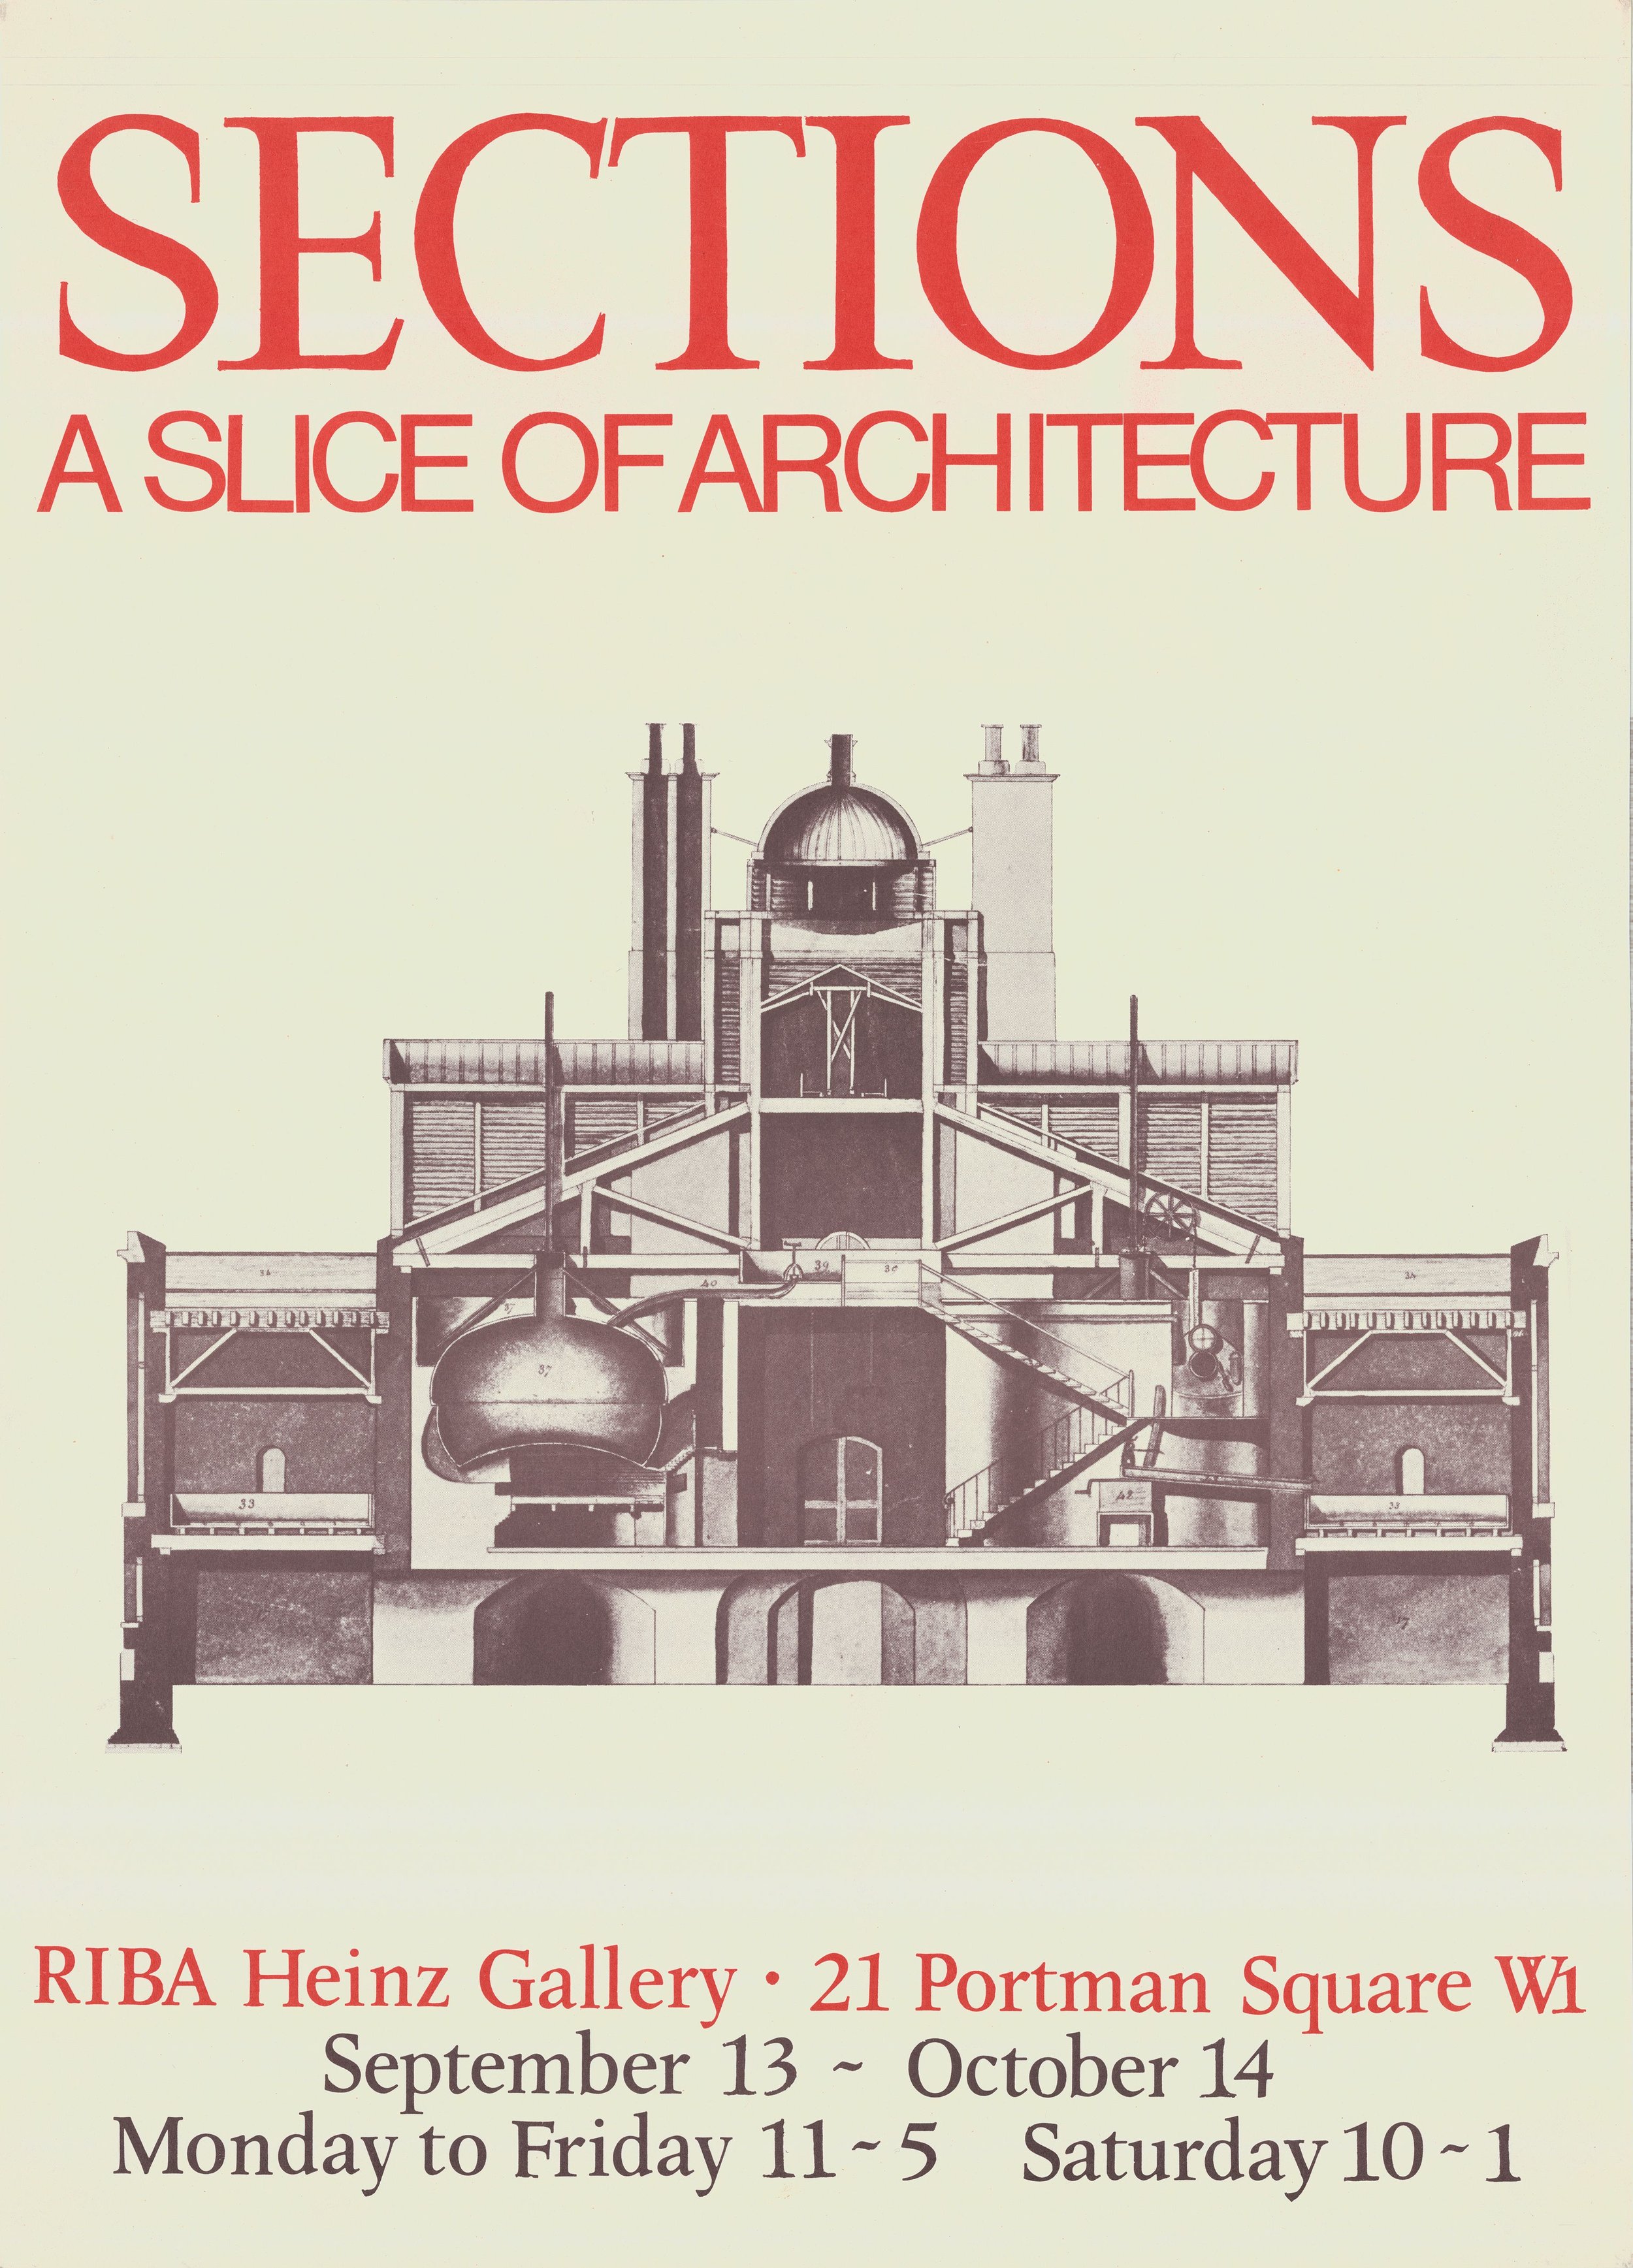 Sections: A Slice of Architecture